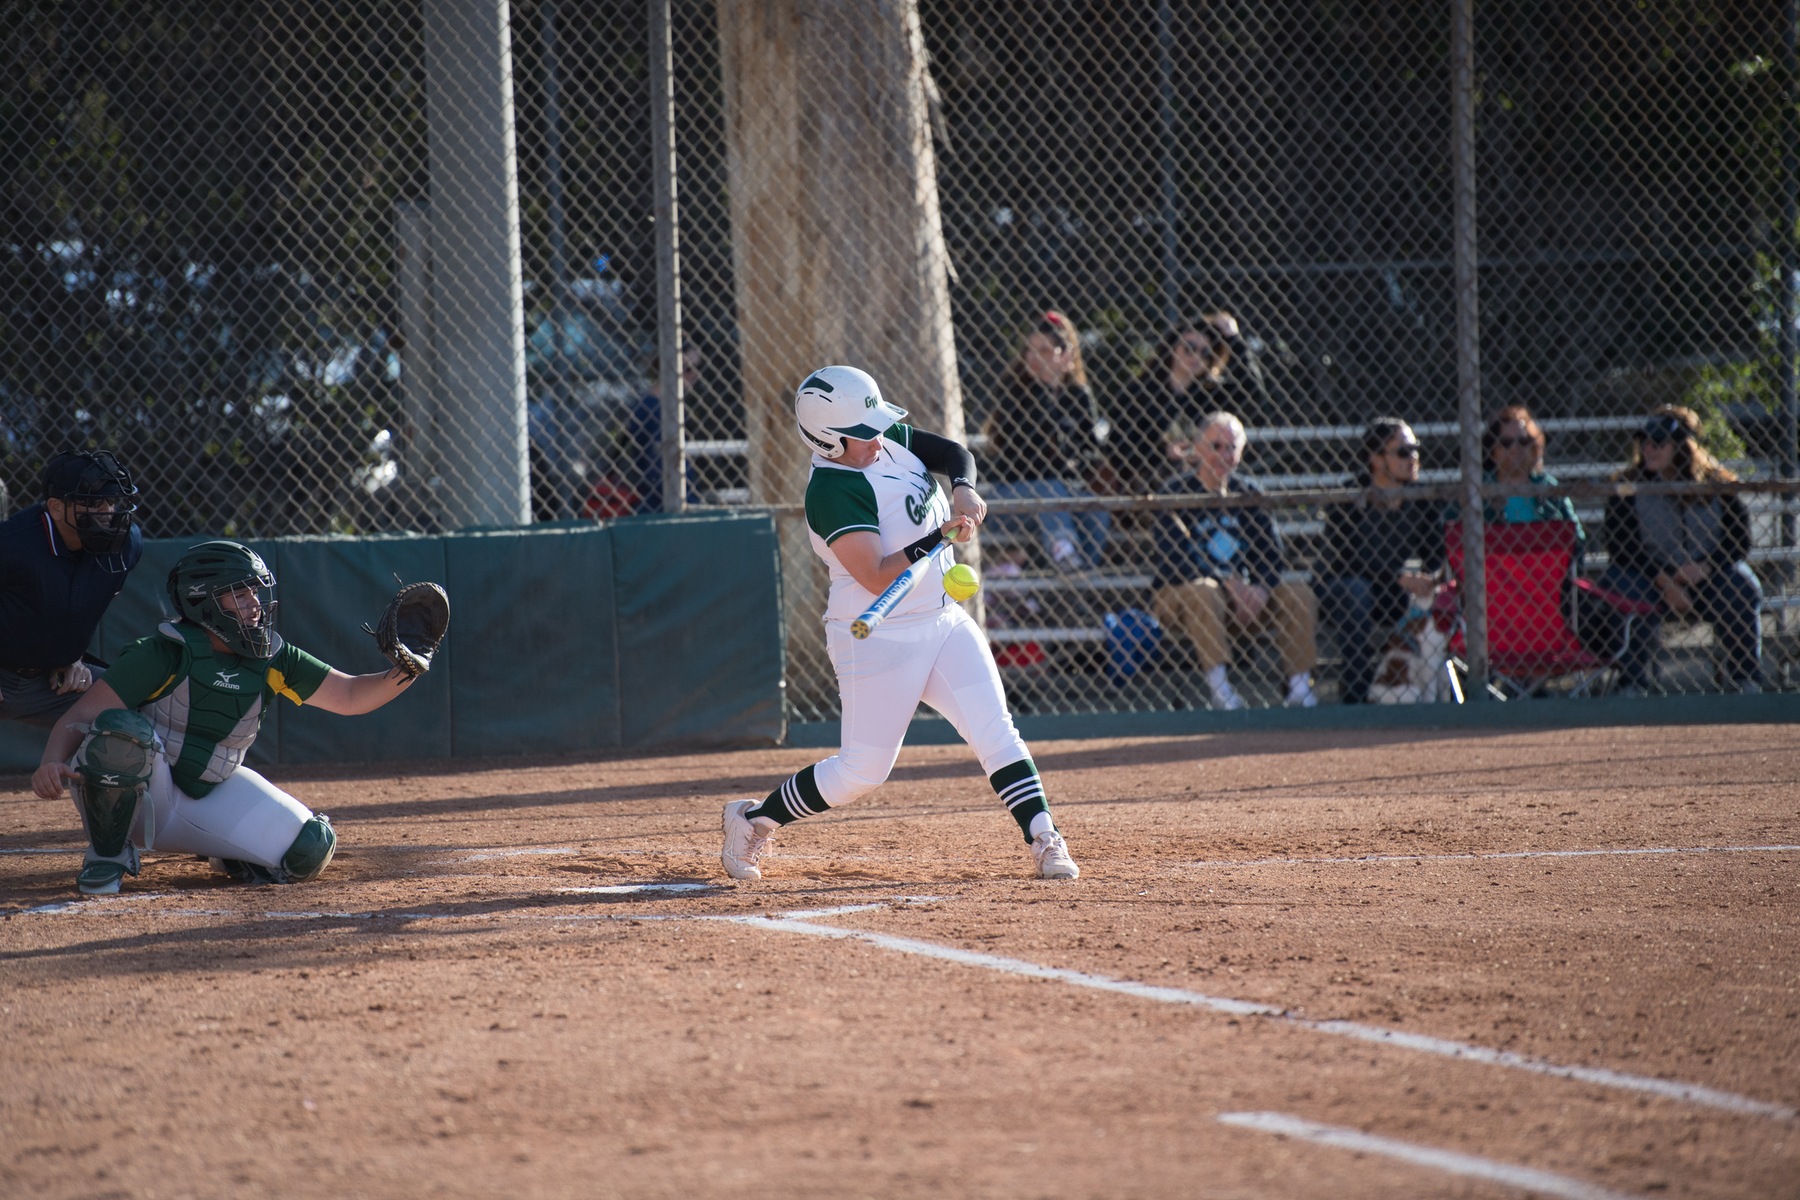 Softball: Three Rustlers Record Multi-Hit Game in Loss to Defending State Champs